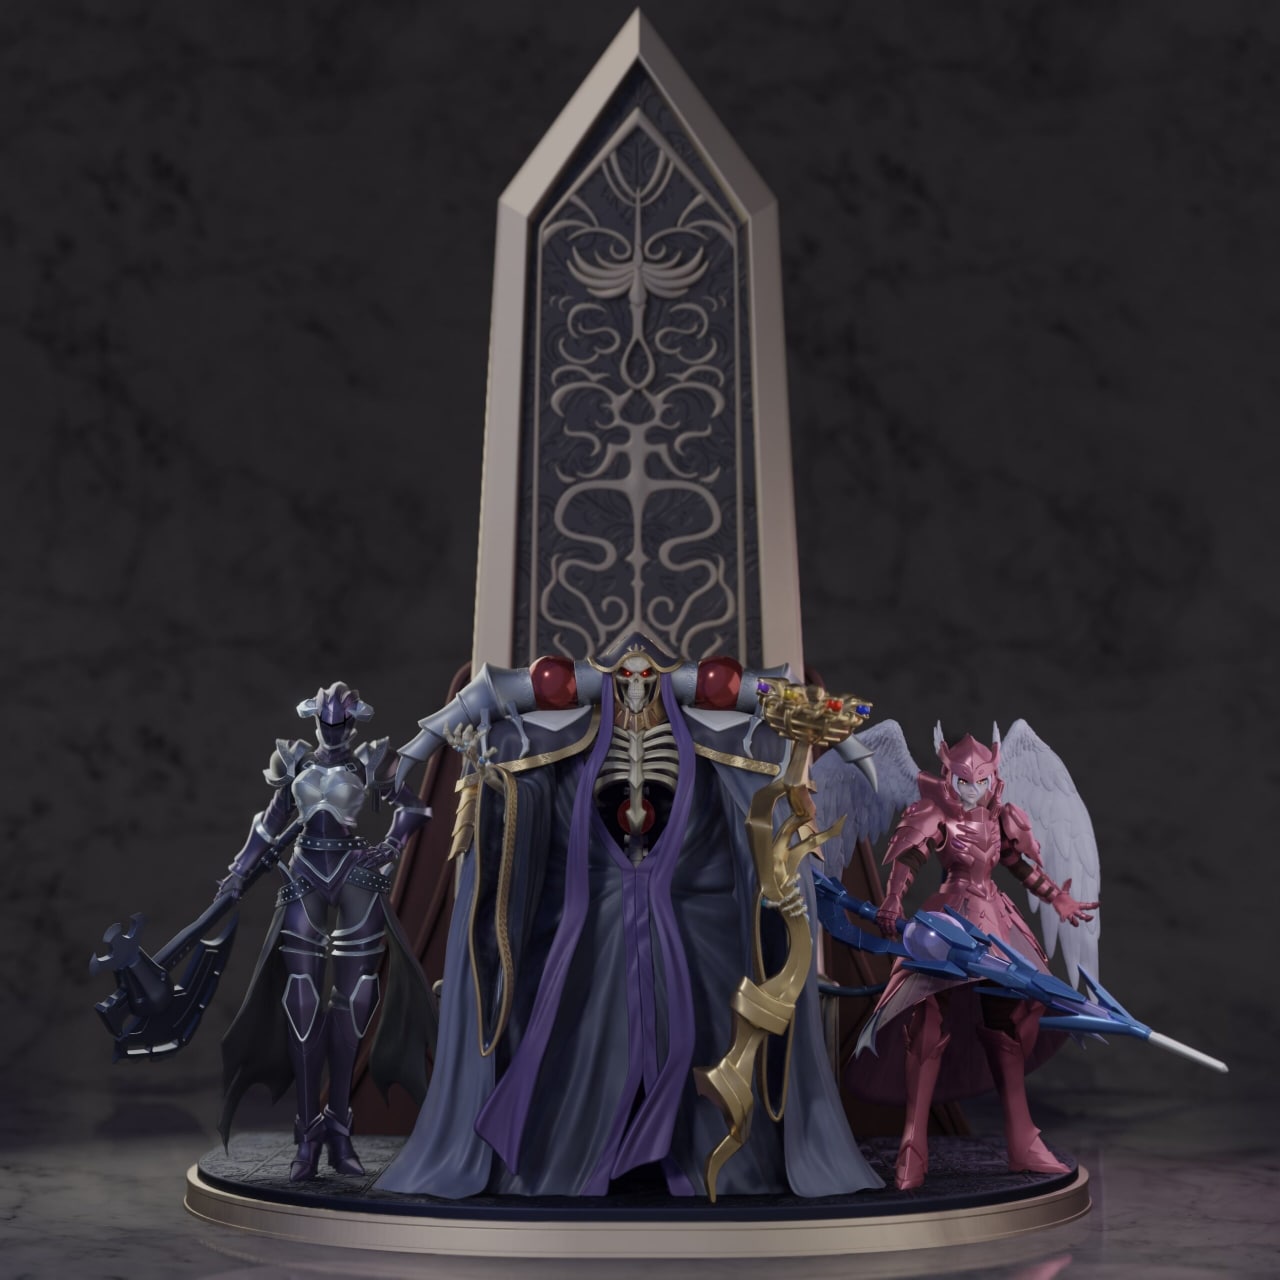 Ainz Ooal Gown STL File 3D Printing Design File Anime Overlord Character 0174